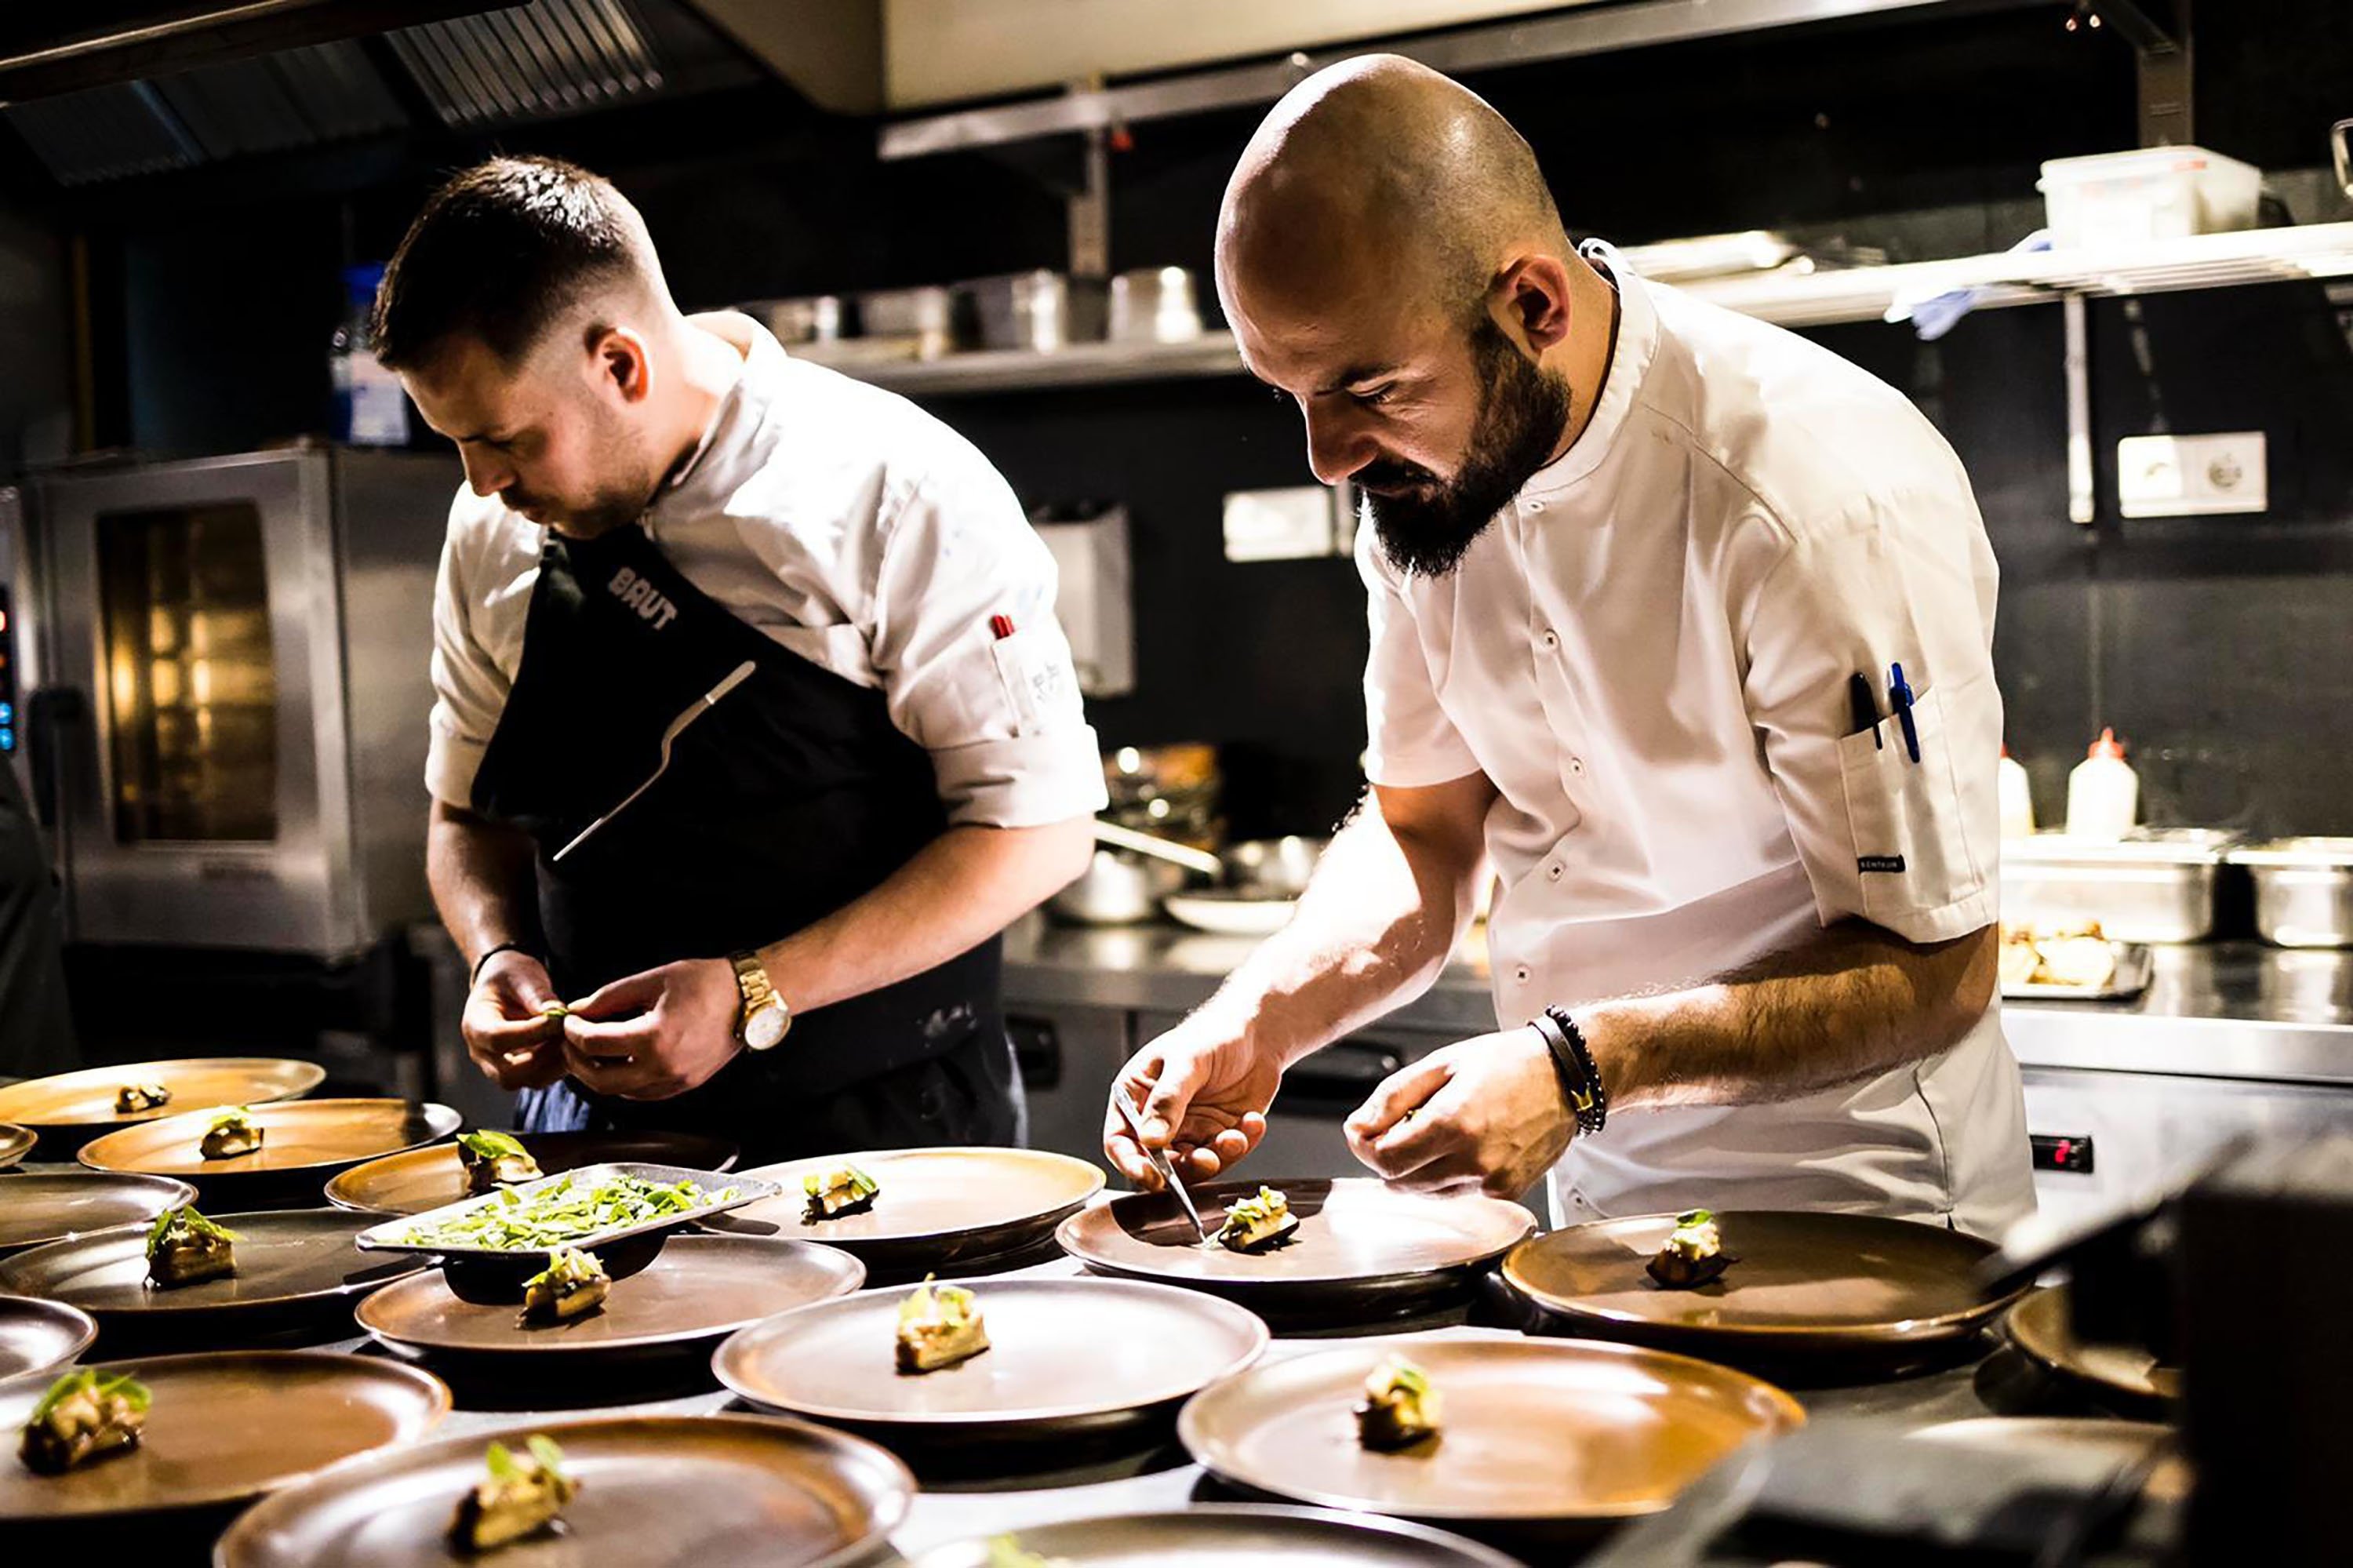 Ahmet Dede (pictured, right) gained a shiny Michelin star for his restaurant in Baltimore, Ireland. (SABAH/ Archive Photo)